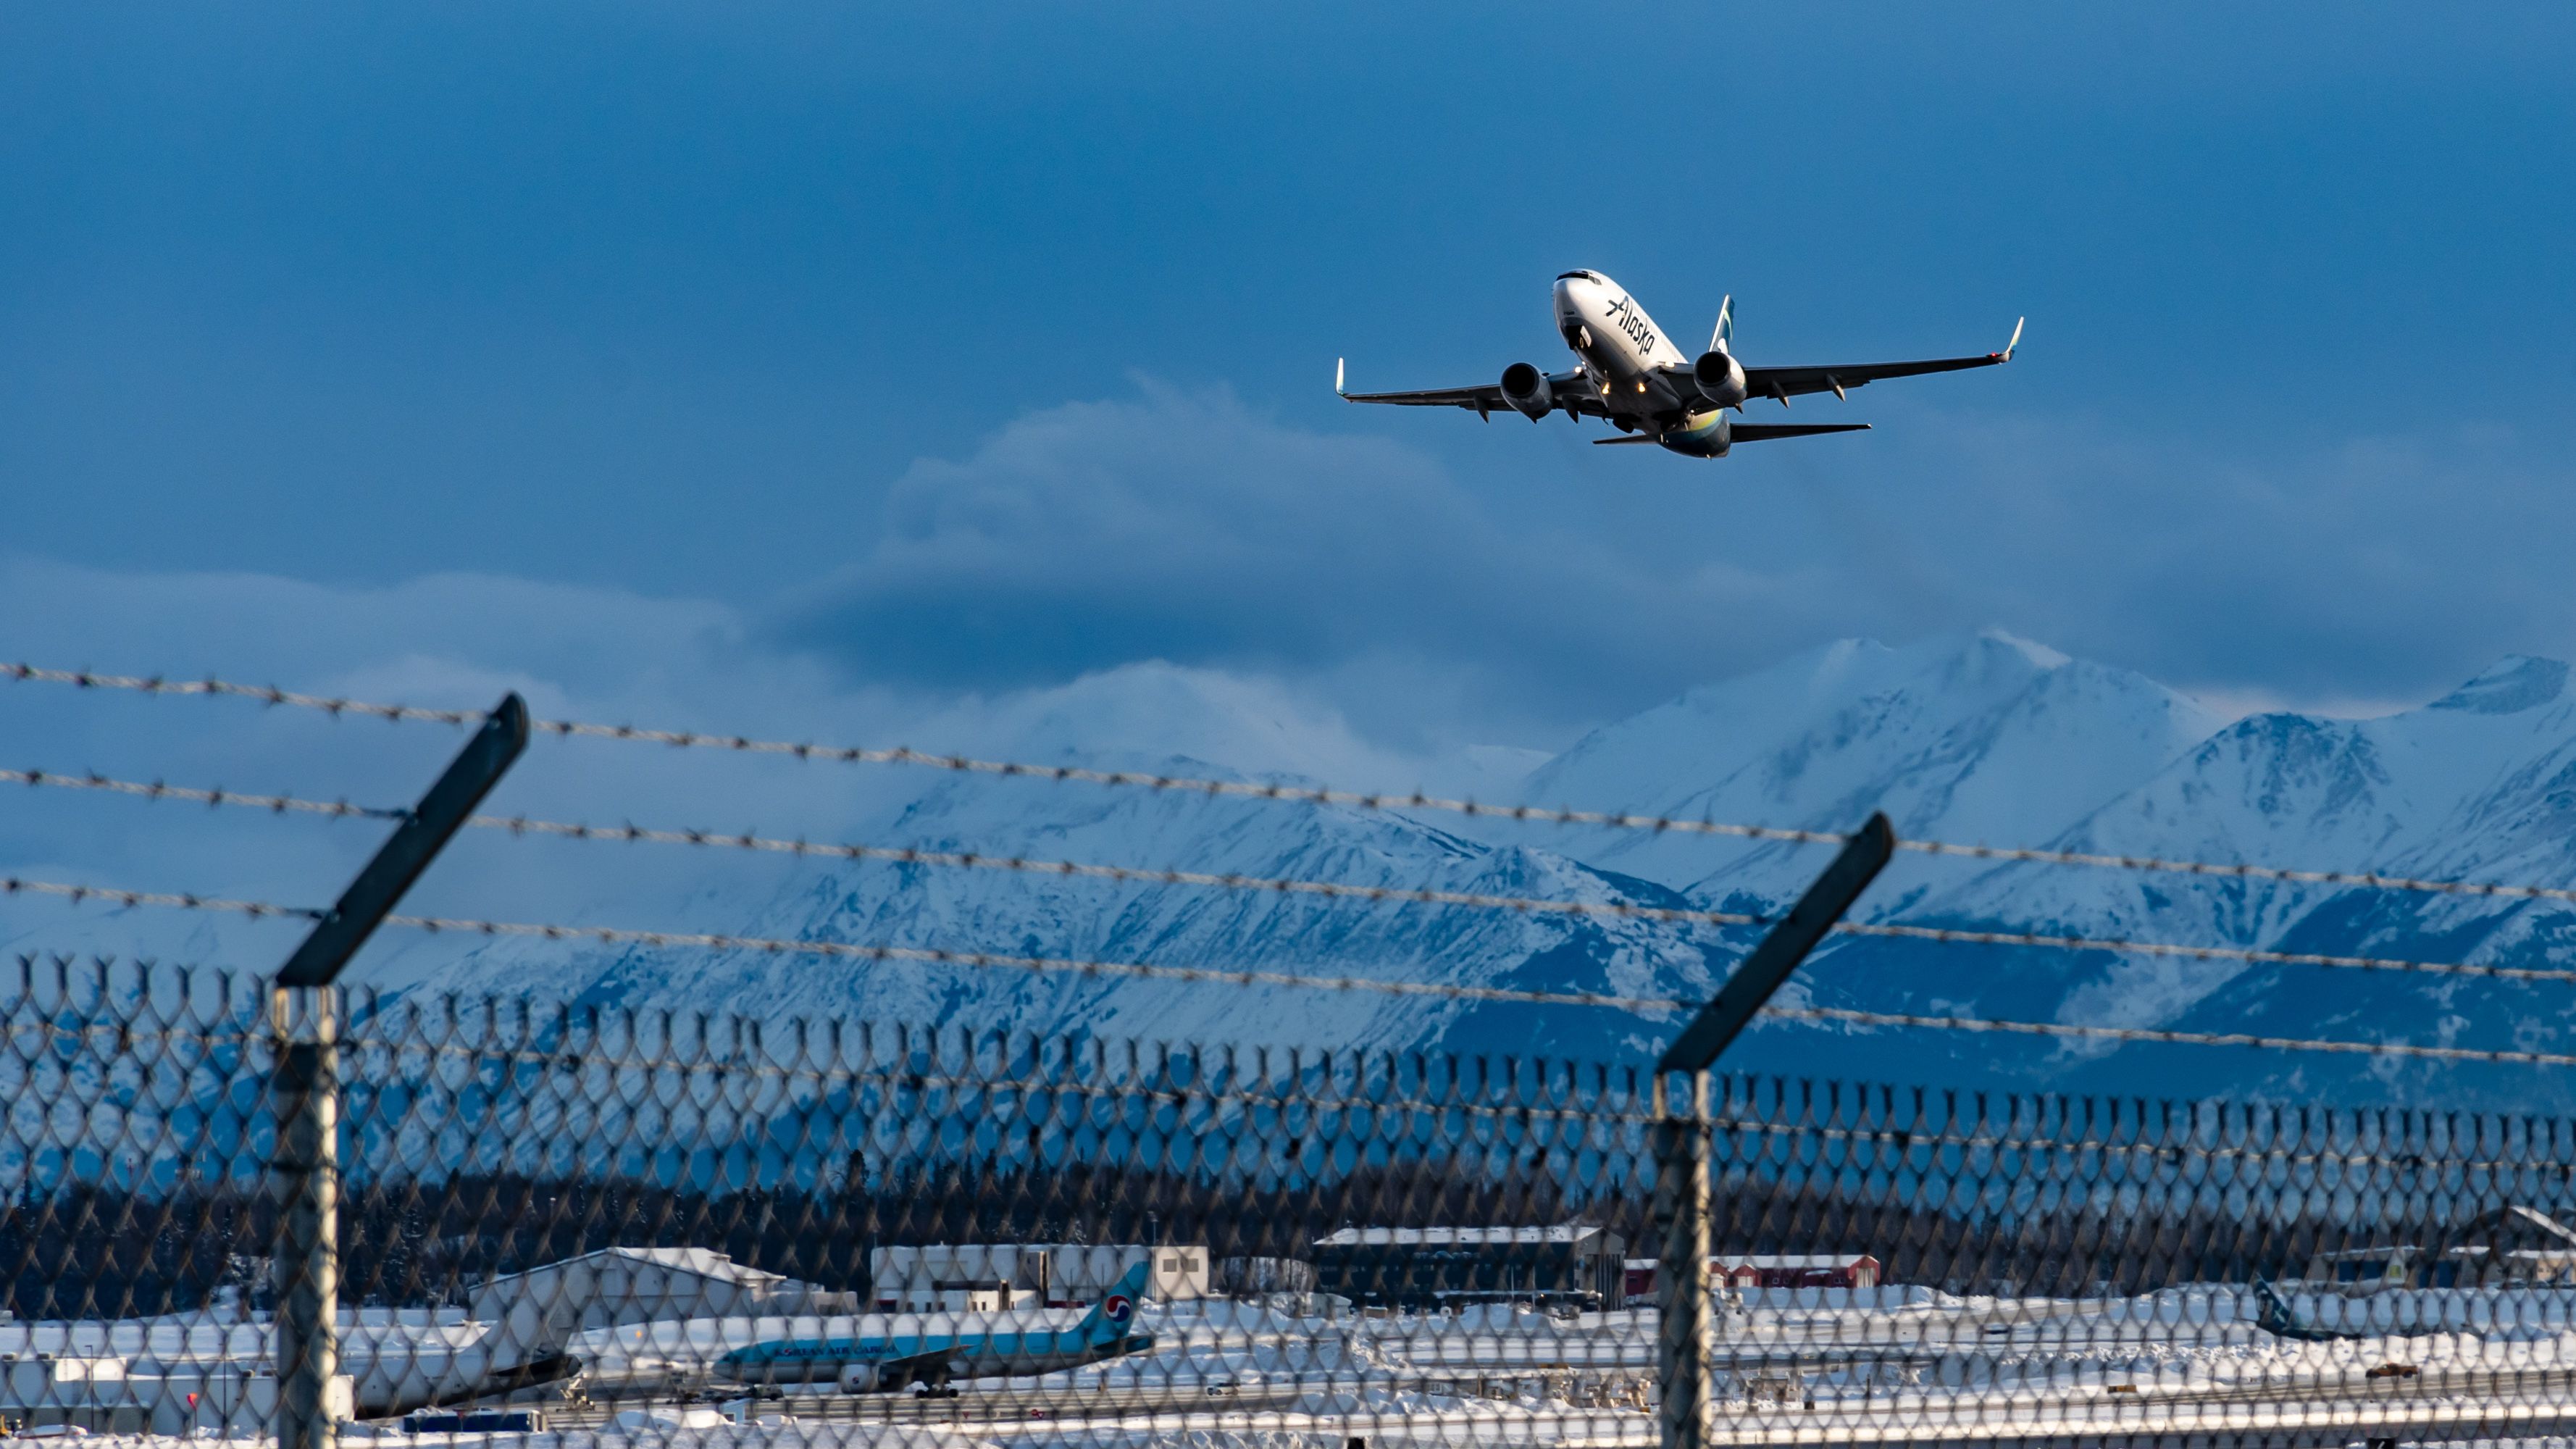 An Alaska Airlines 737-700 Taking off from Anchorage.